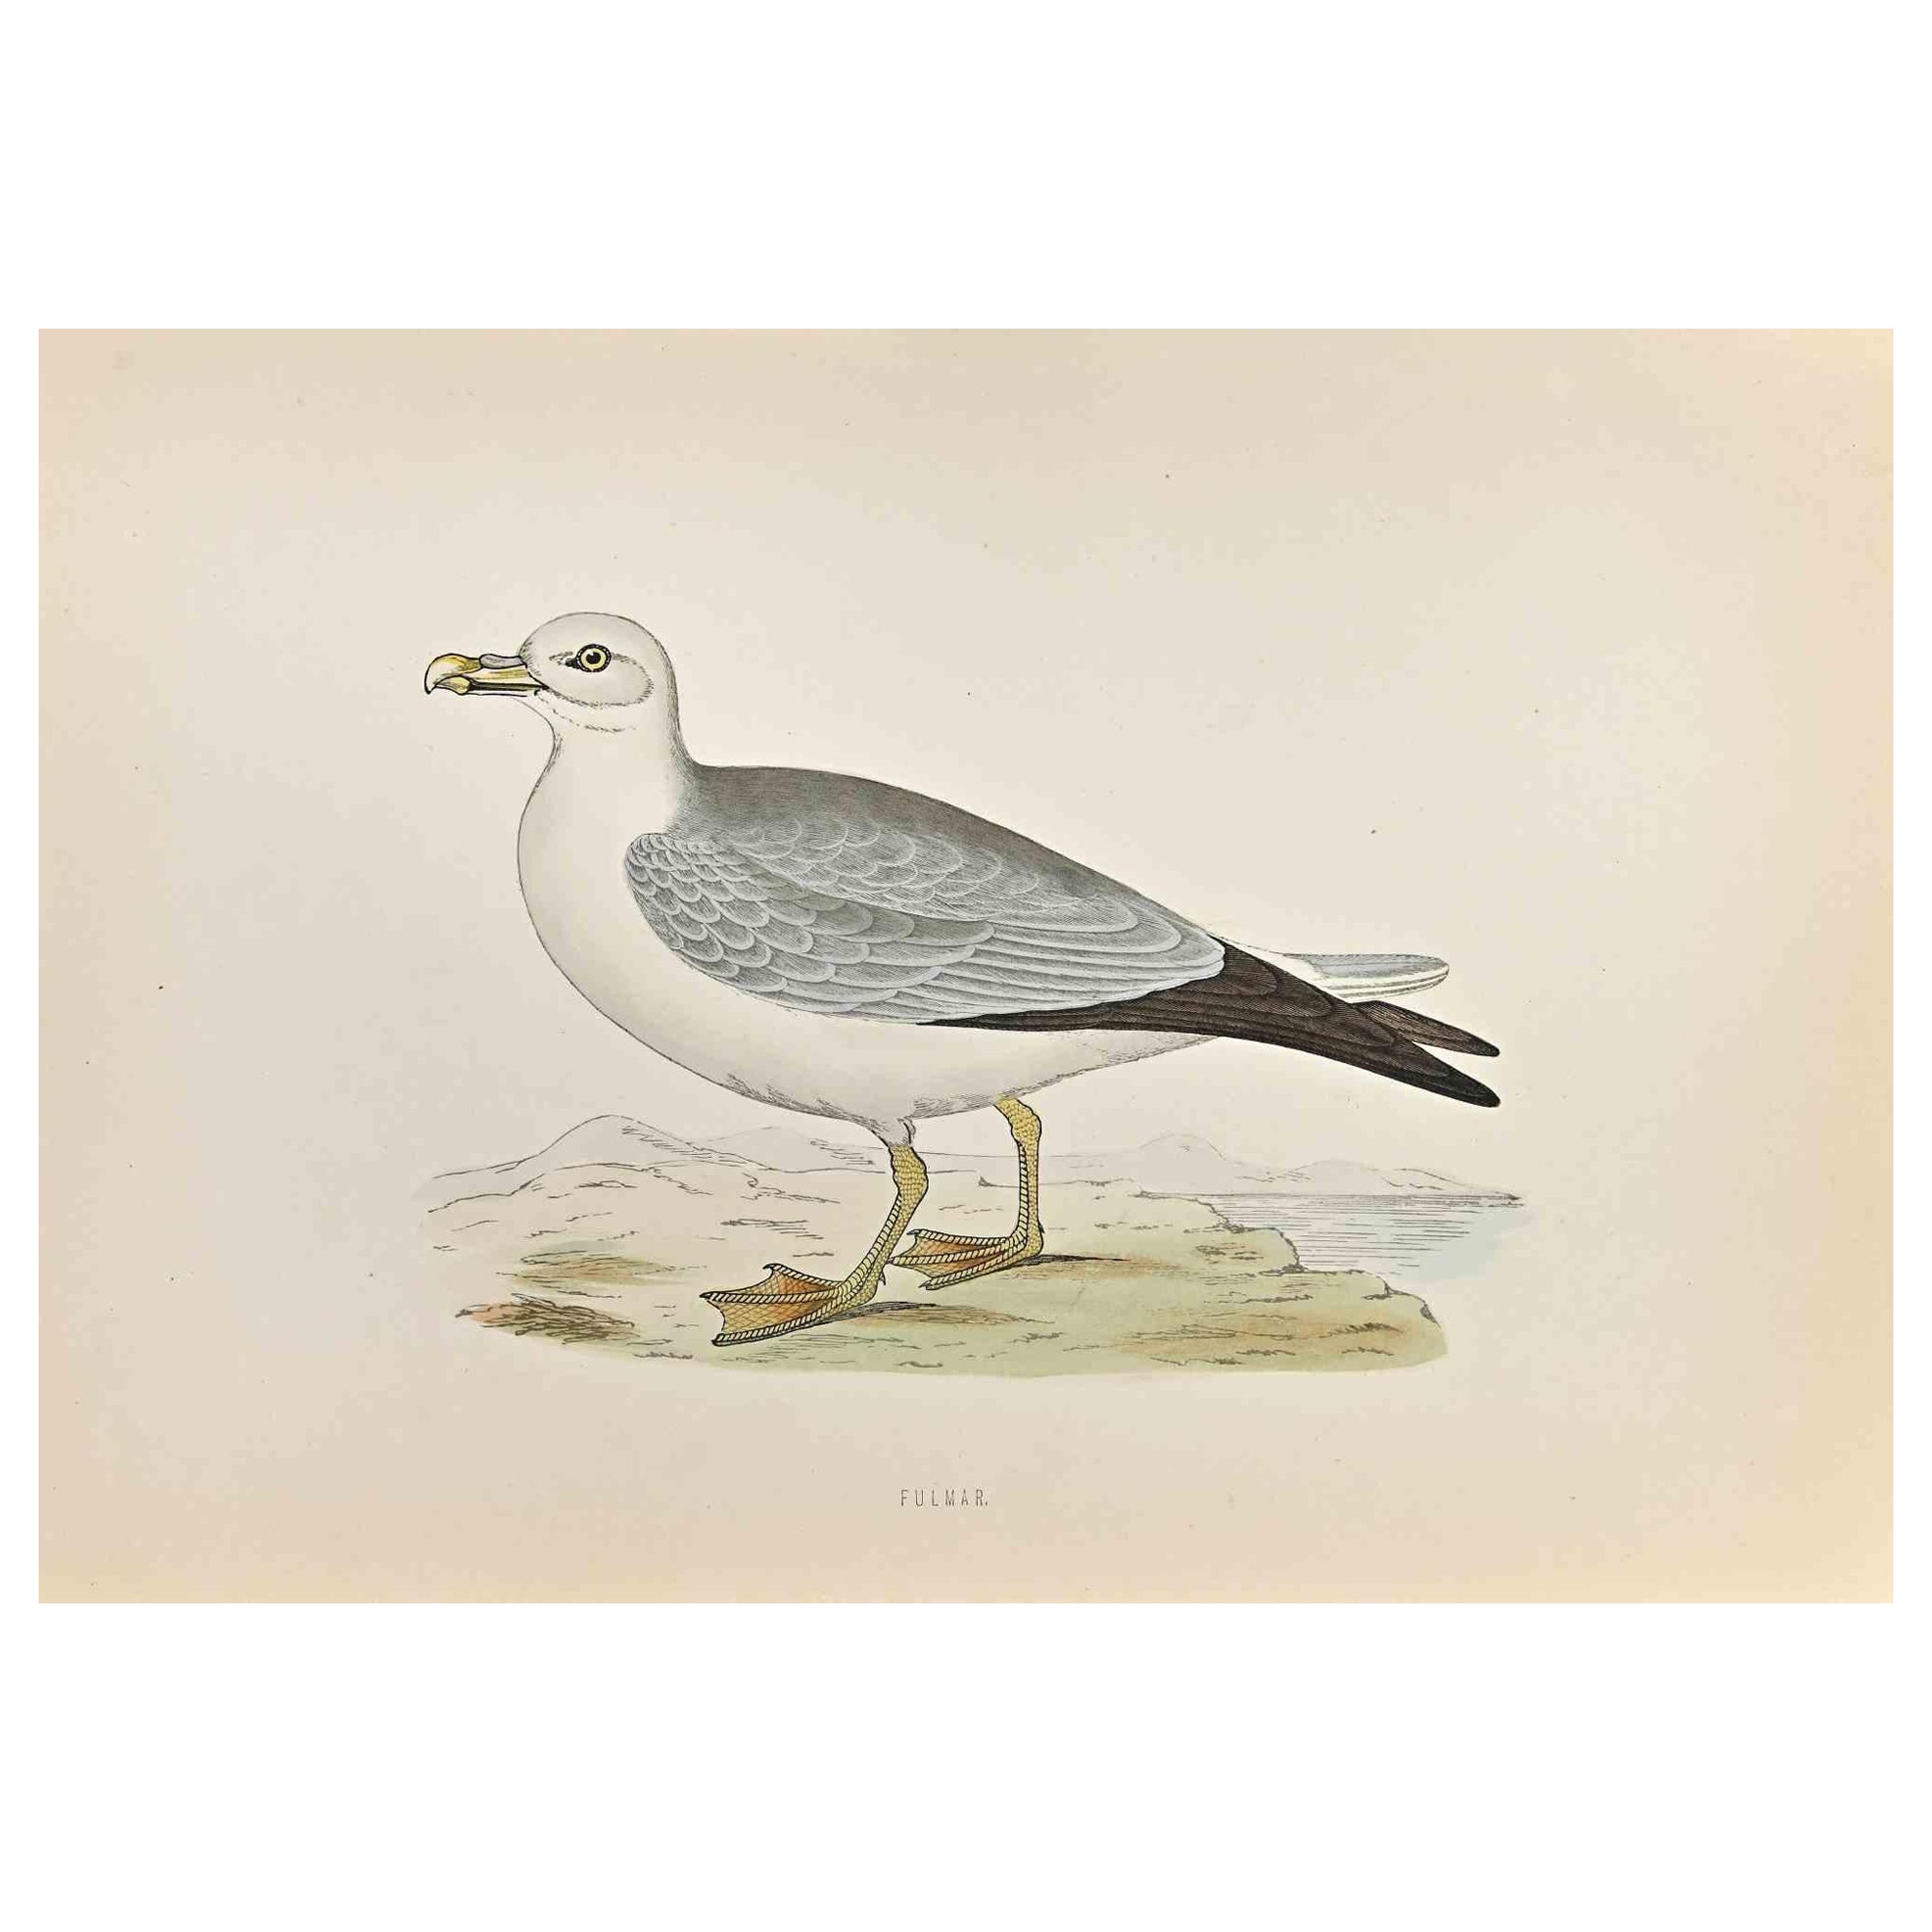 Fulmar is a modern artwork realized in 1870 by the British artist Alexander Francis Lydon (1836-1917) . 

Woodcut print, hand colored, published by London, Bell & Sons, 1870.  Name of the bird printed in plate. This work is part of a print suite